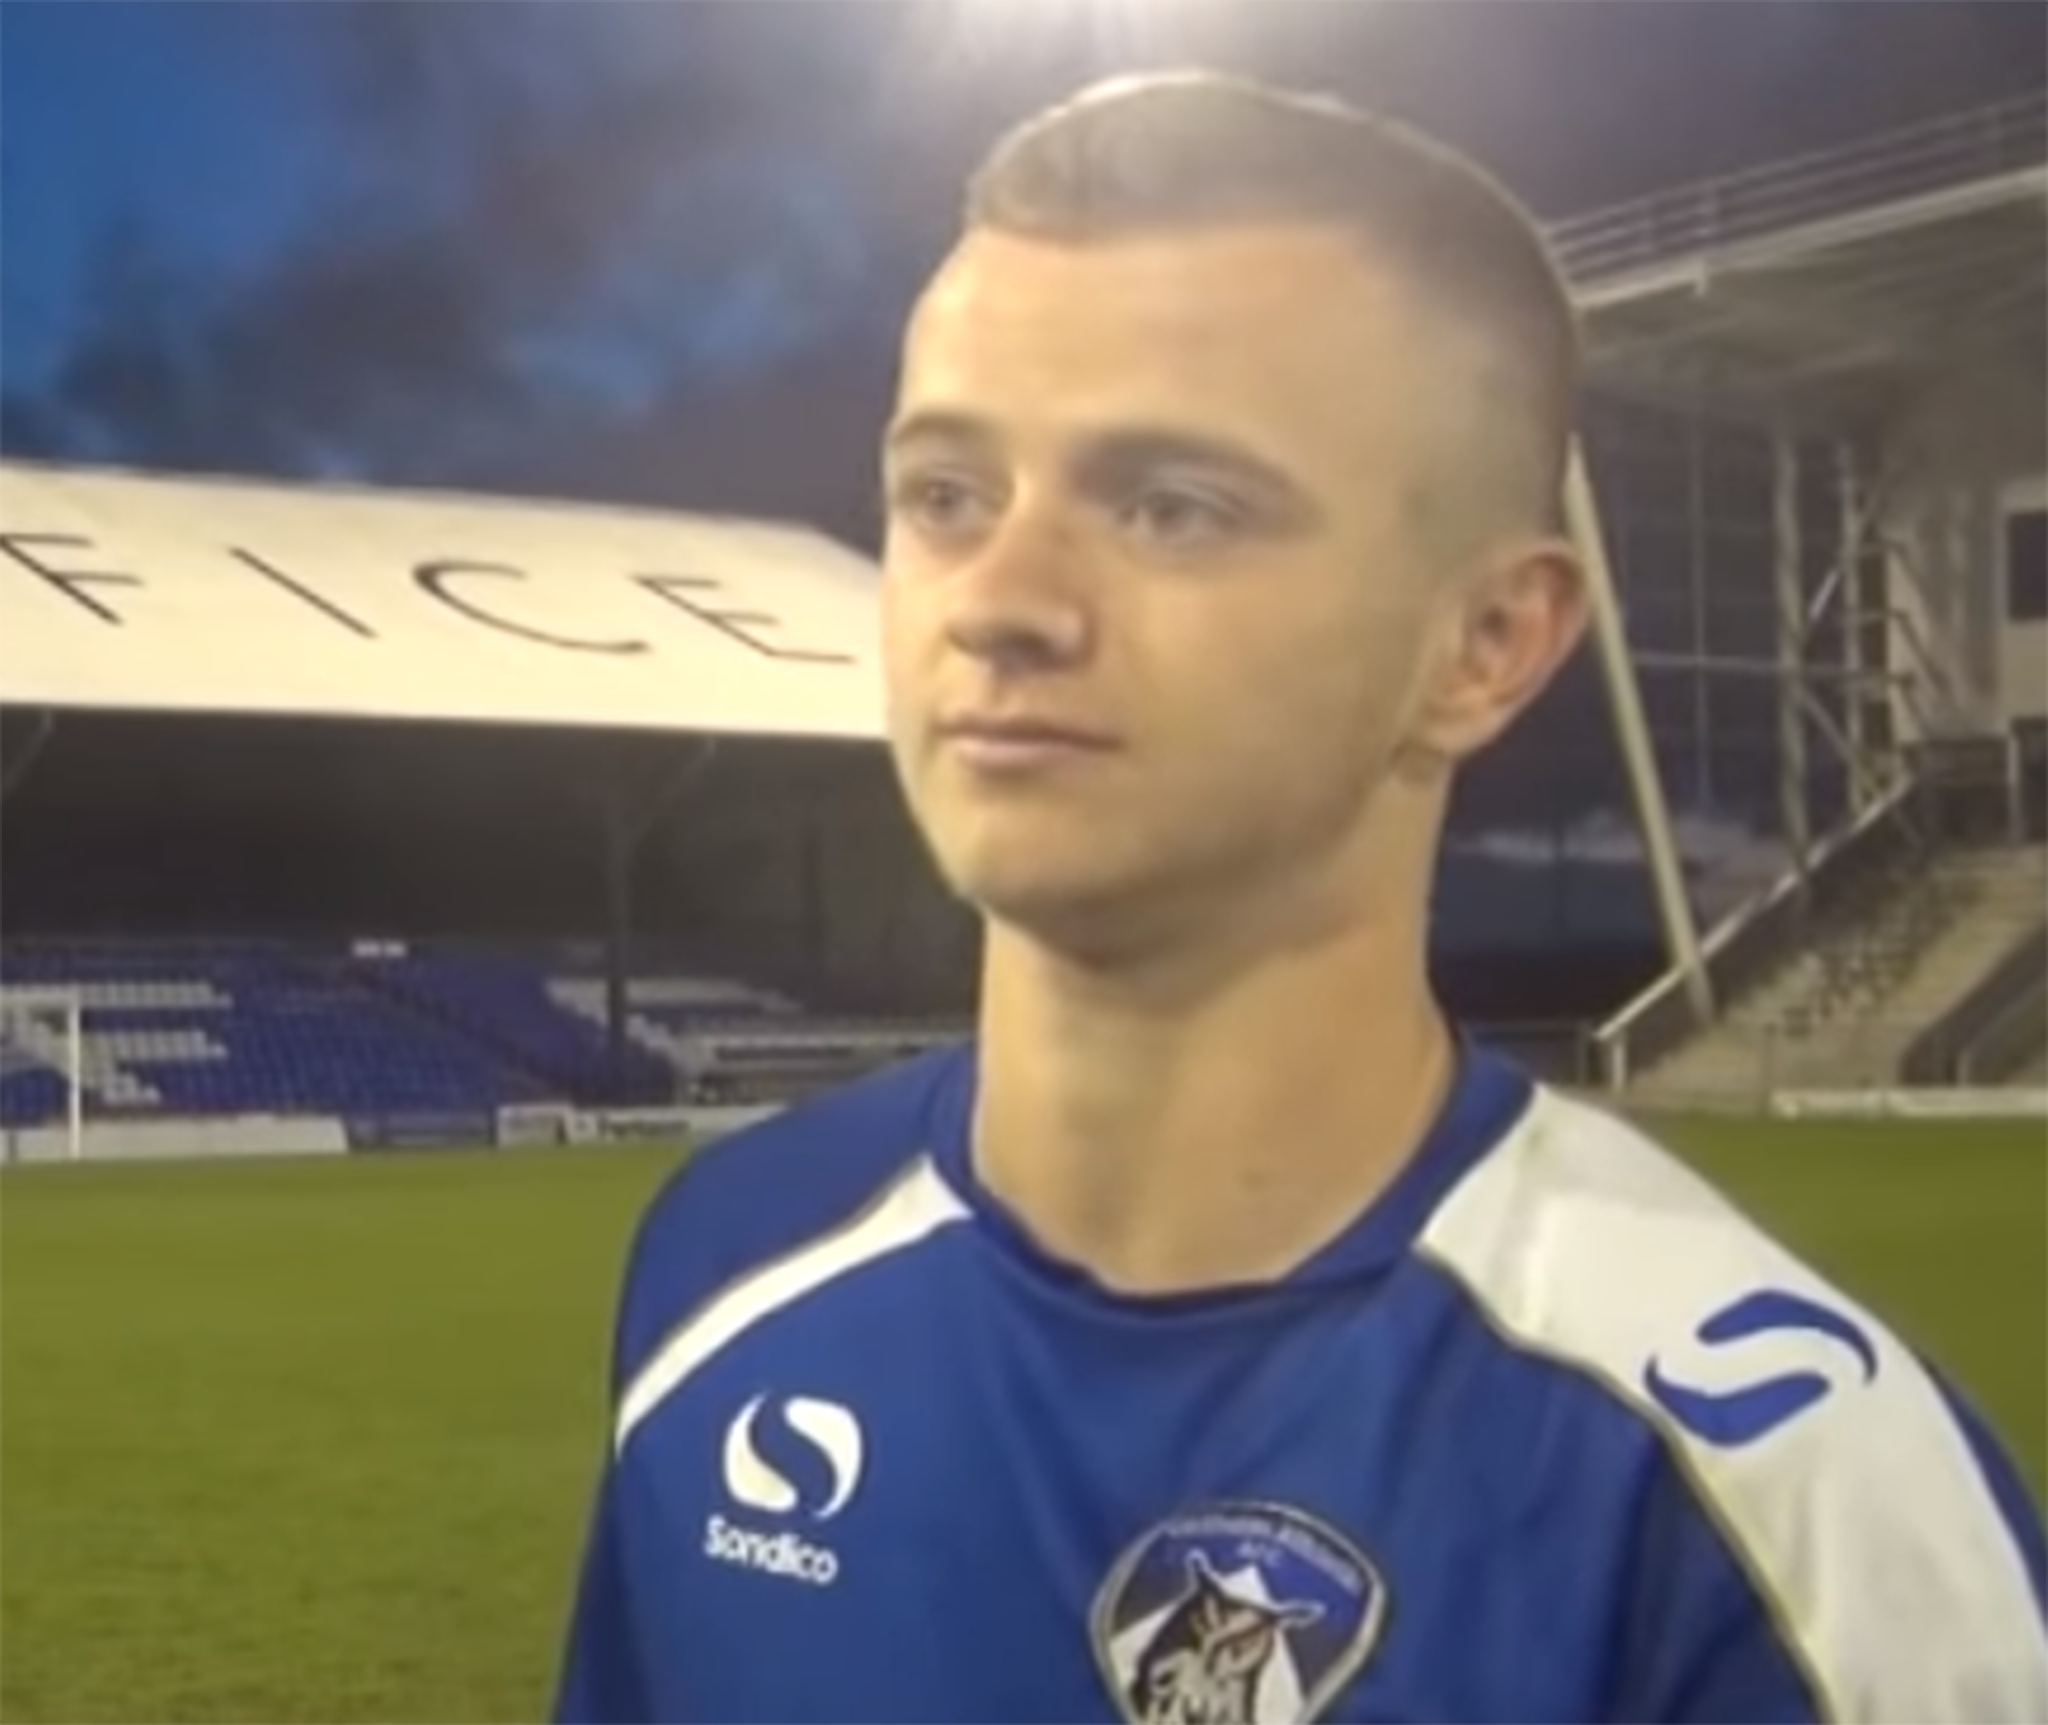 Jack Tuohy, 19, was on loan at Ramsbottom United when he was arrested in October 2015